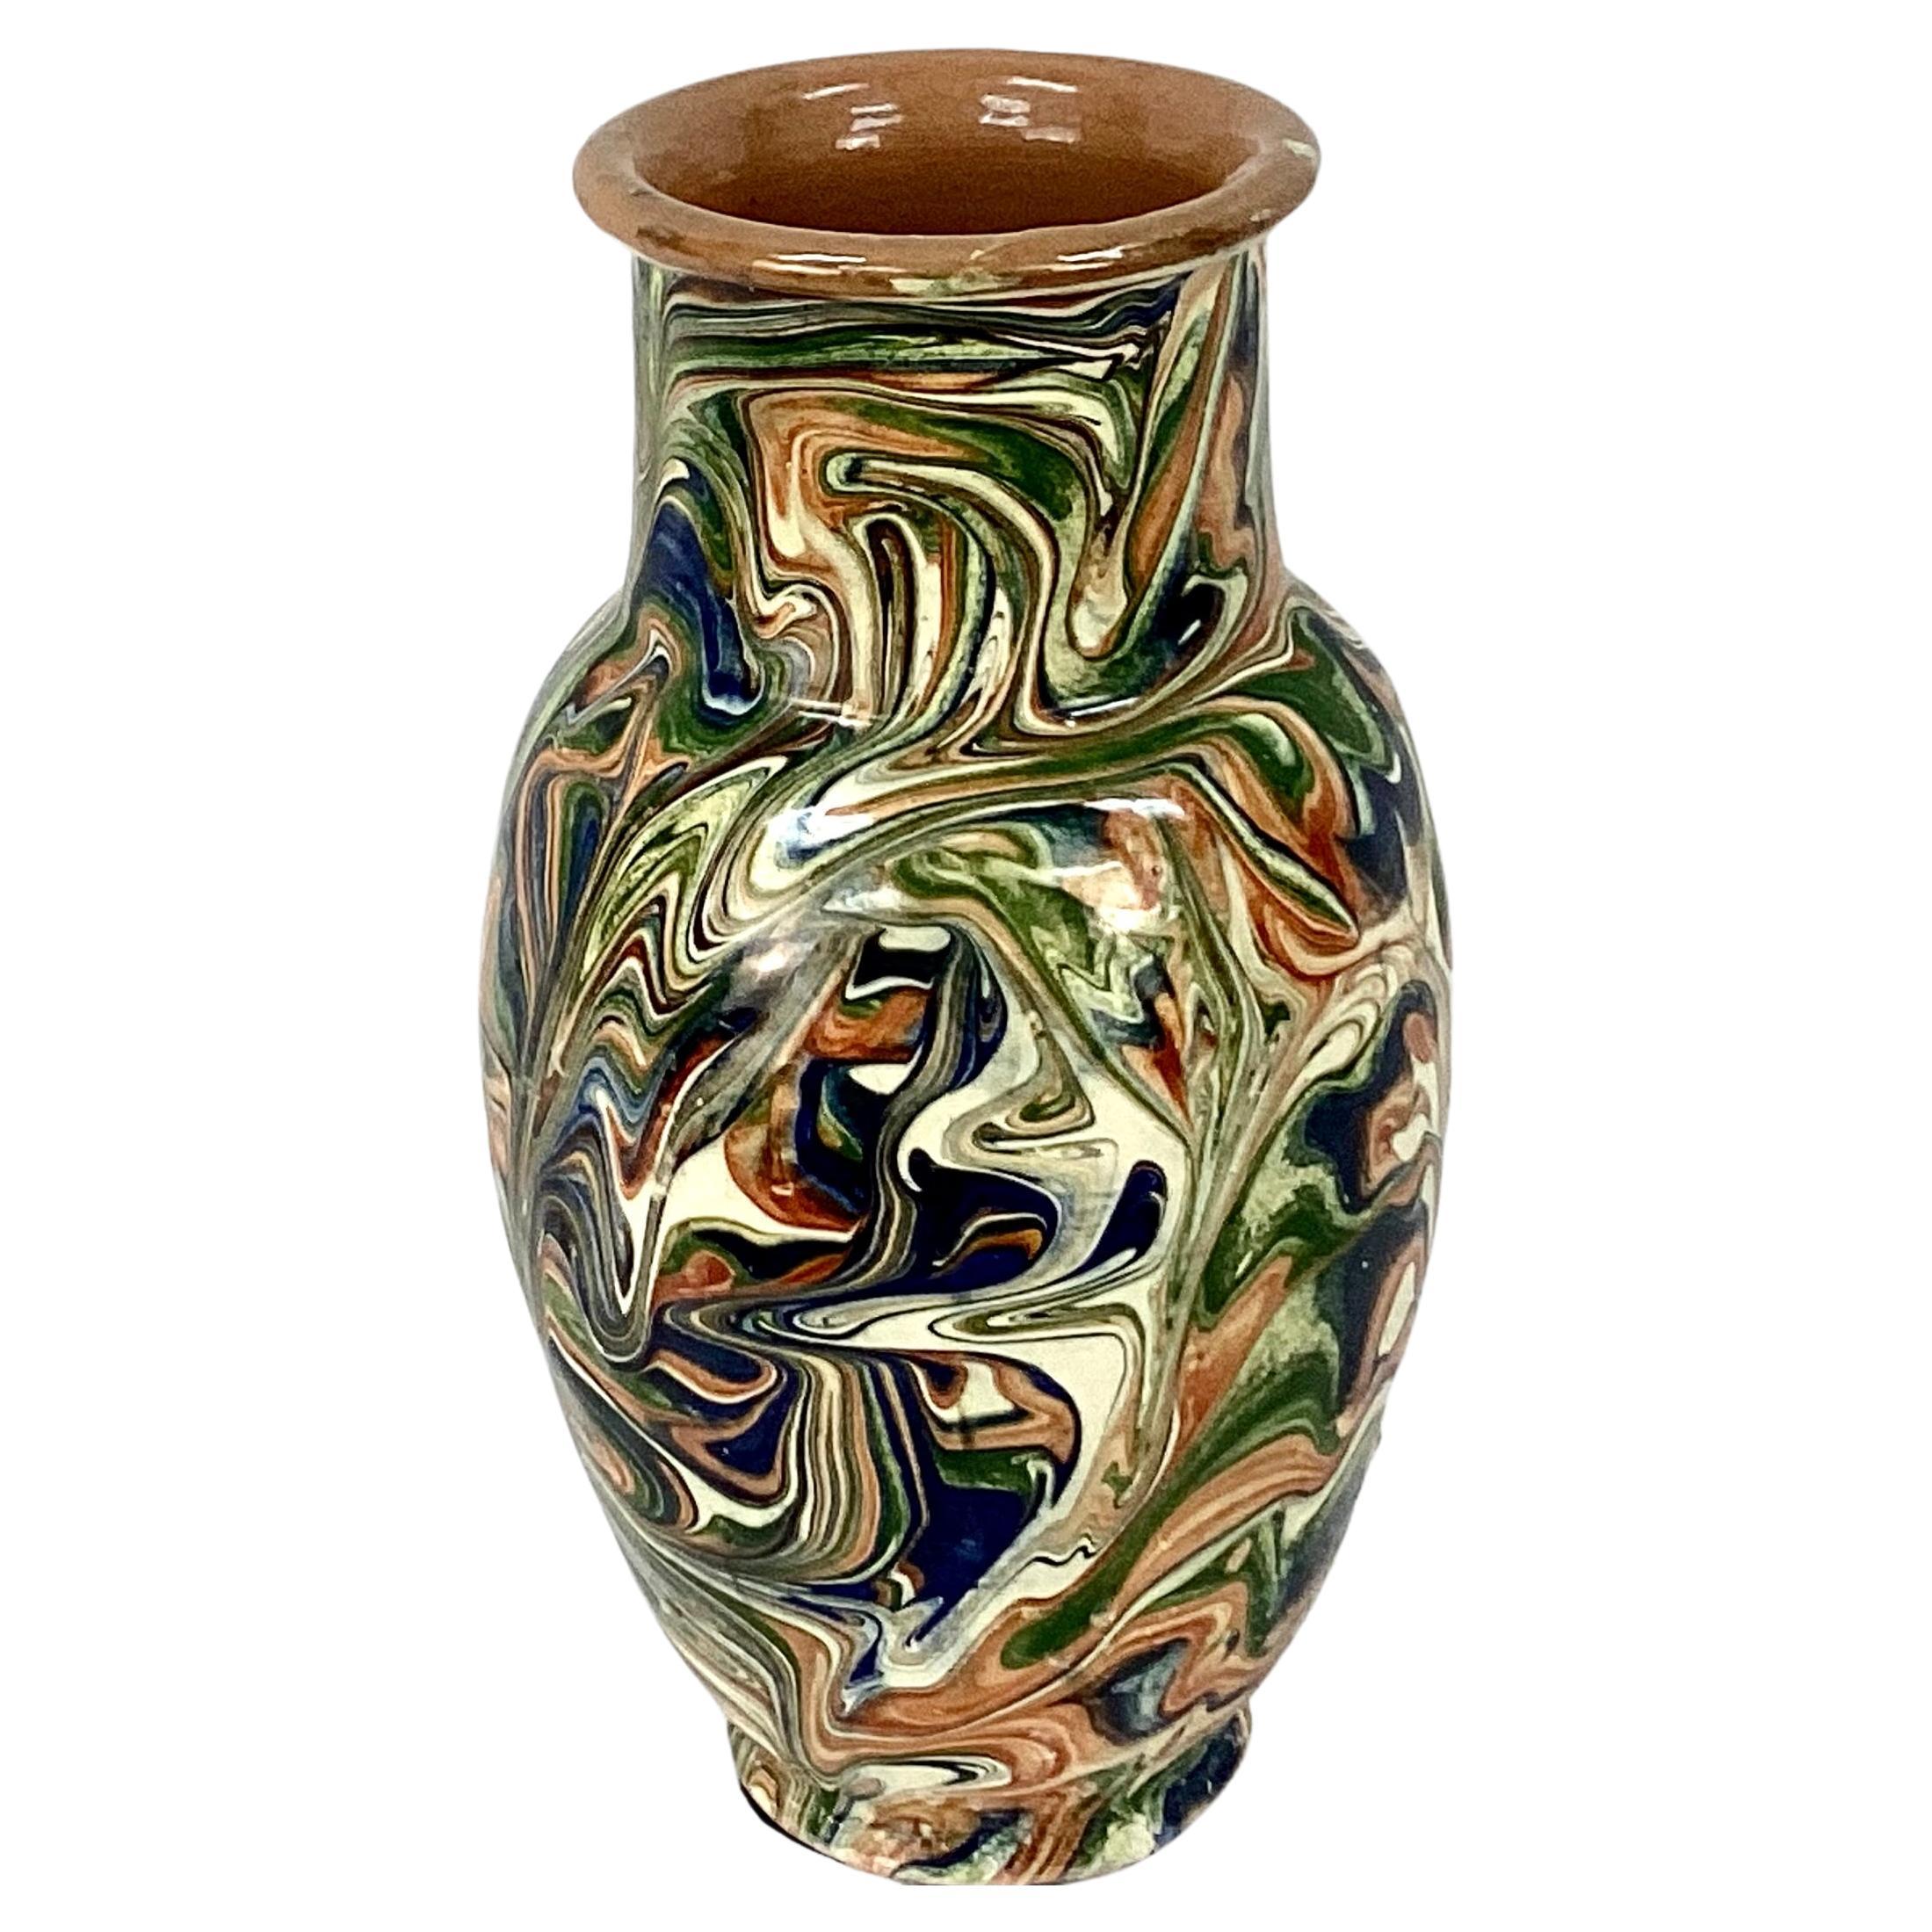 Stunning Aptware vase is hand shaped in marble clay swirls following the traditional method of French Apt pottery. Vase is in beautifully burnt orange, cream and green colored marbleized pottery, inspired by the soils in Apt, a small town in France.